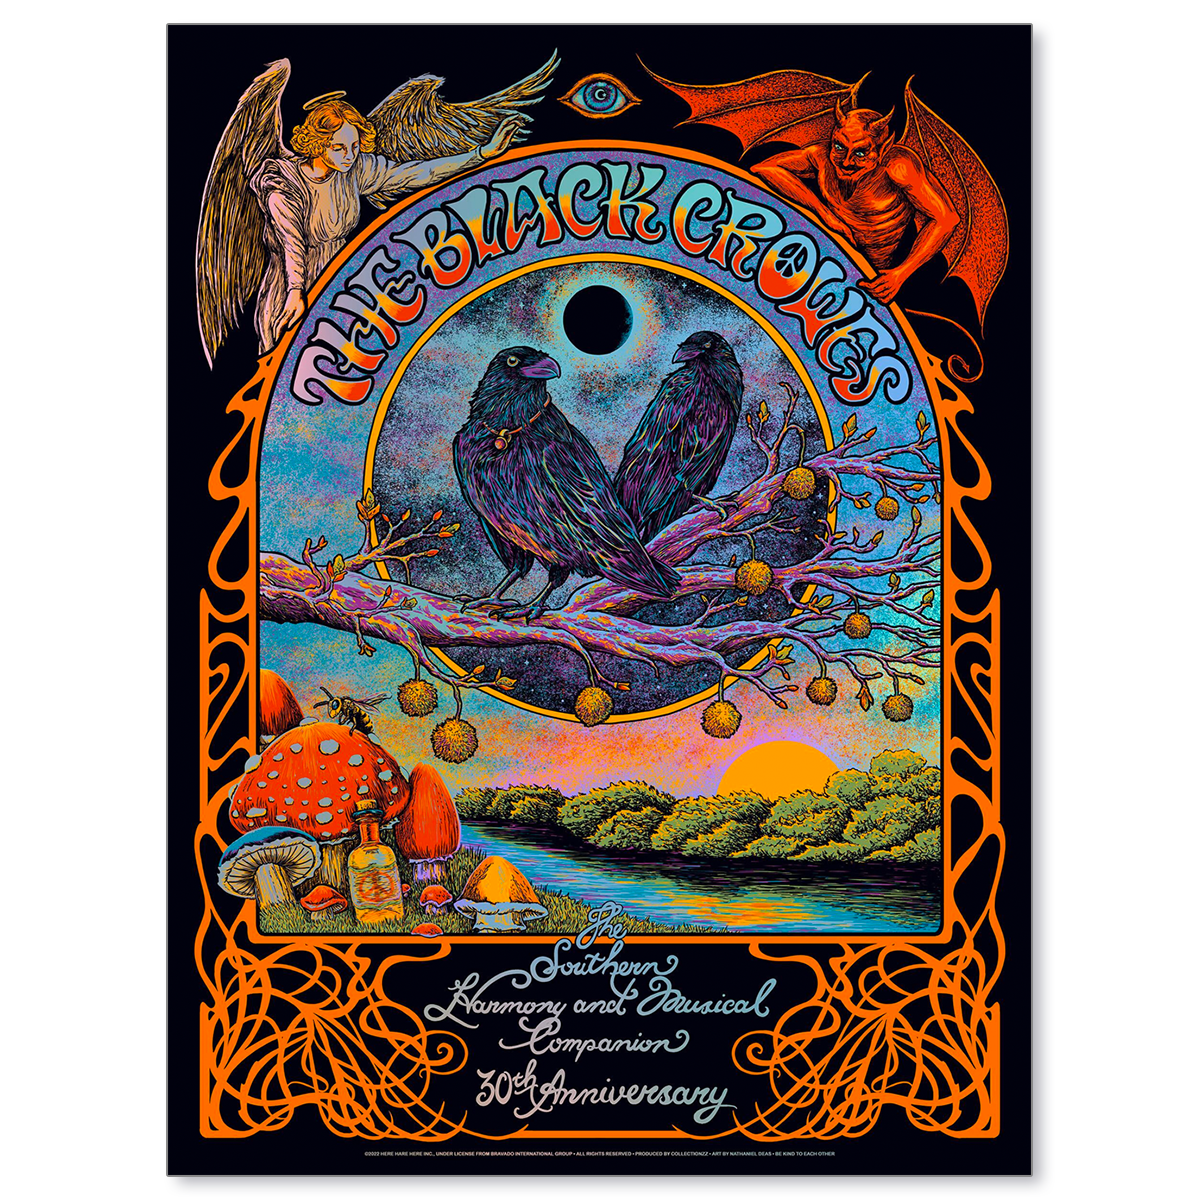 The Black Crowes The Southern Harmony And Musical Companion (Foil Edition)